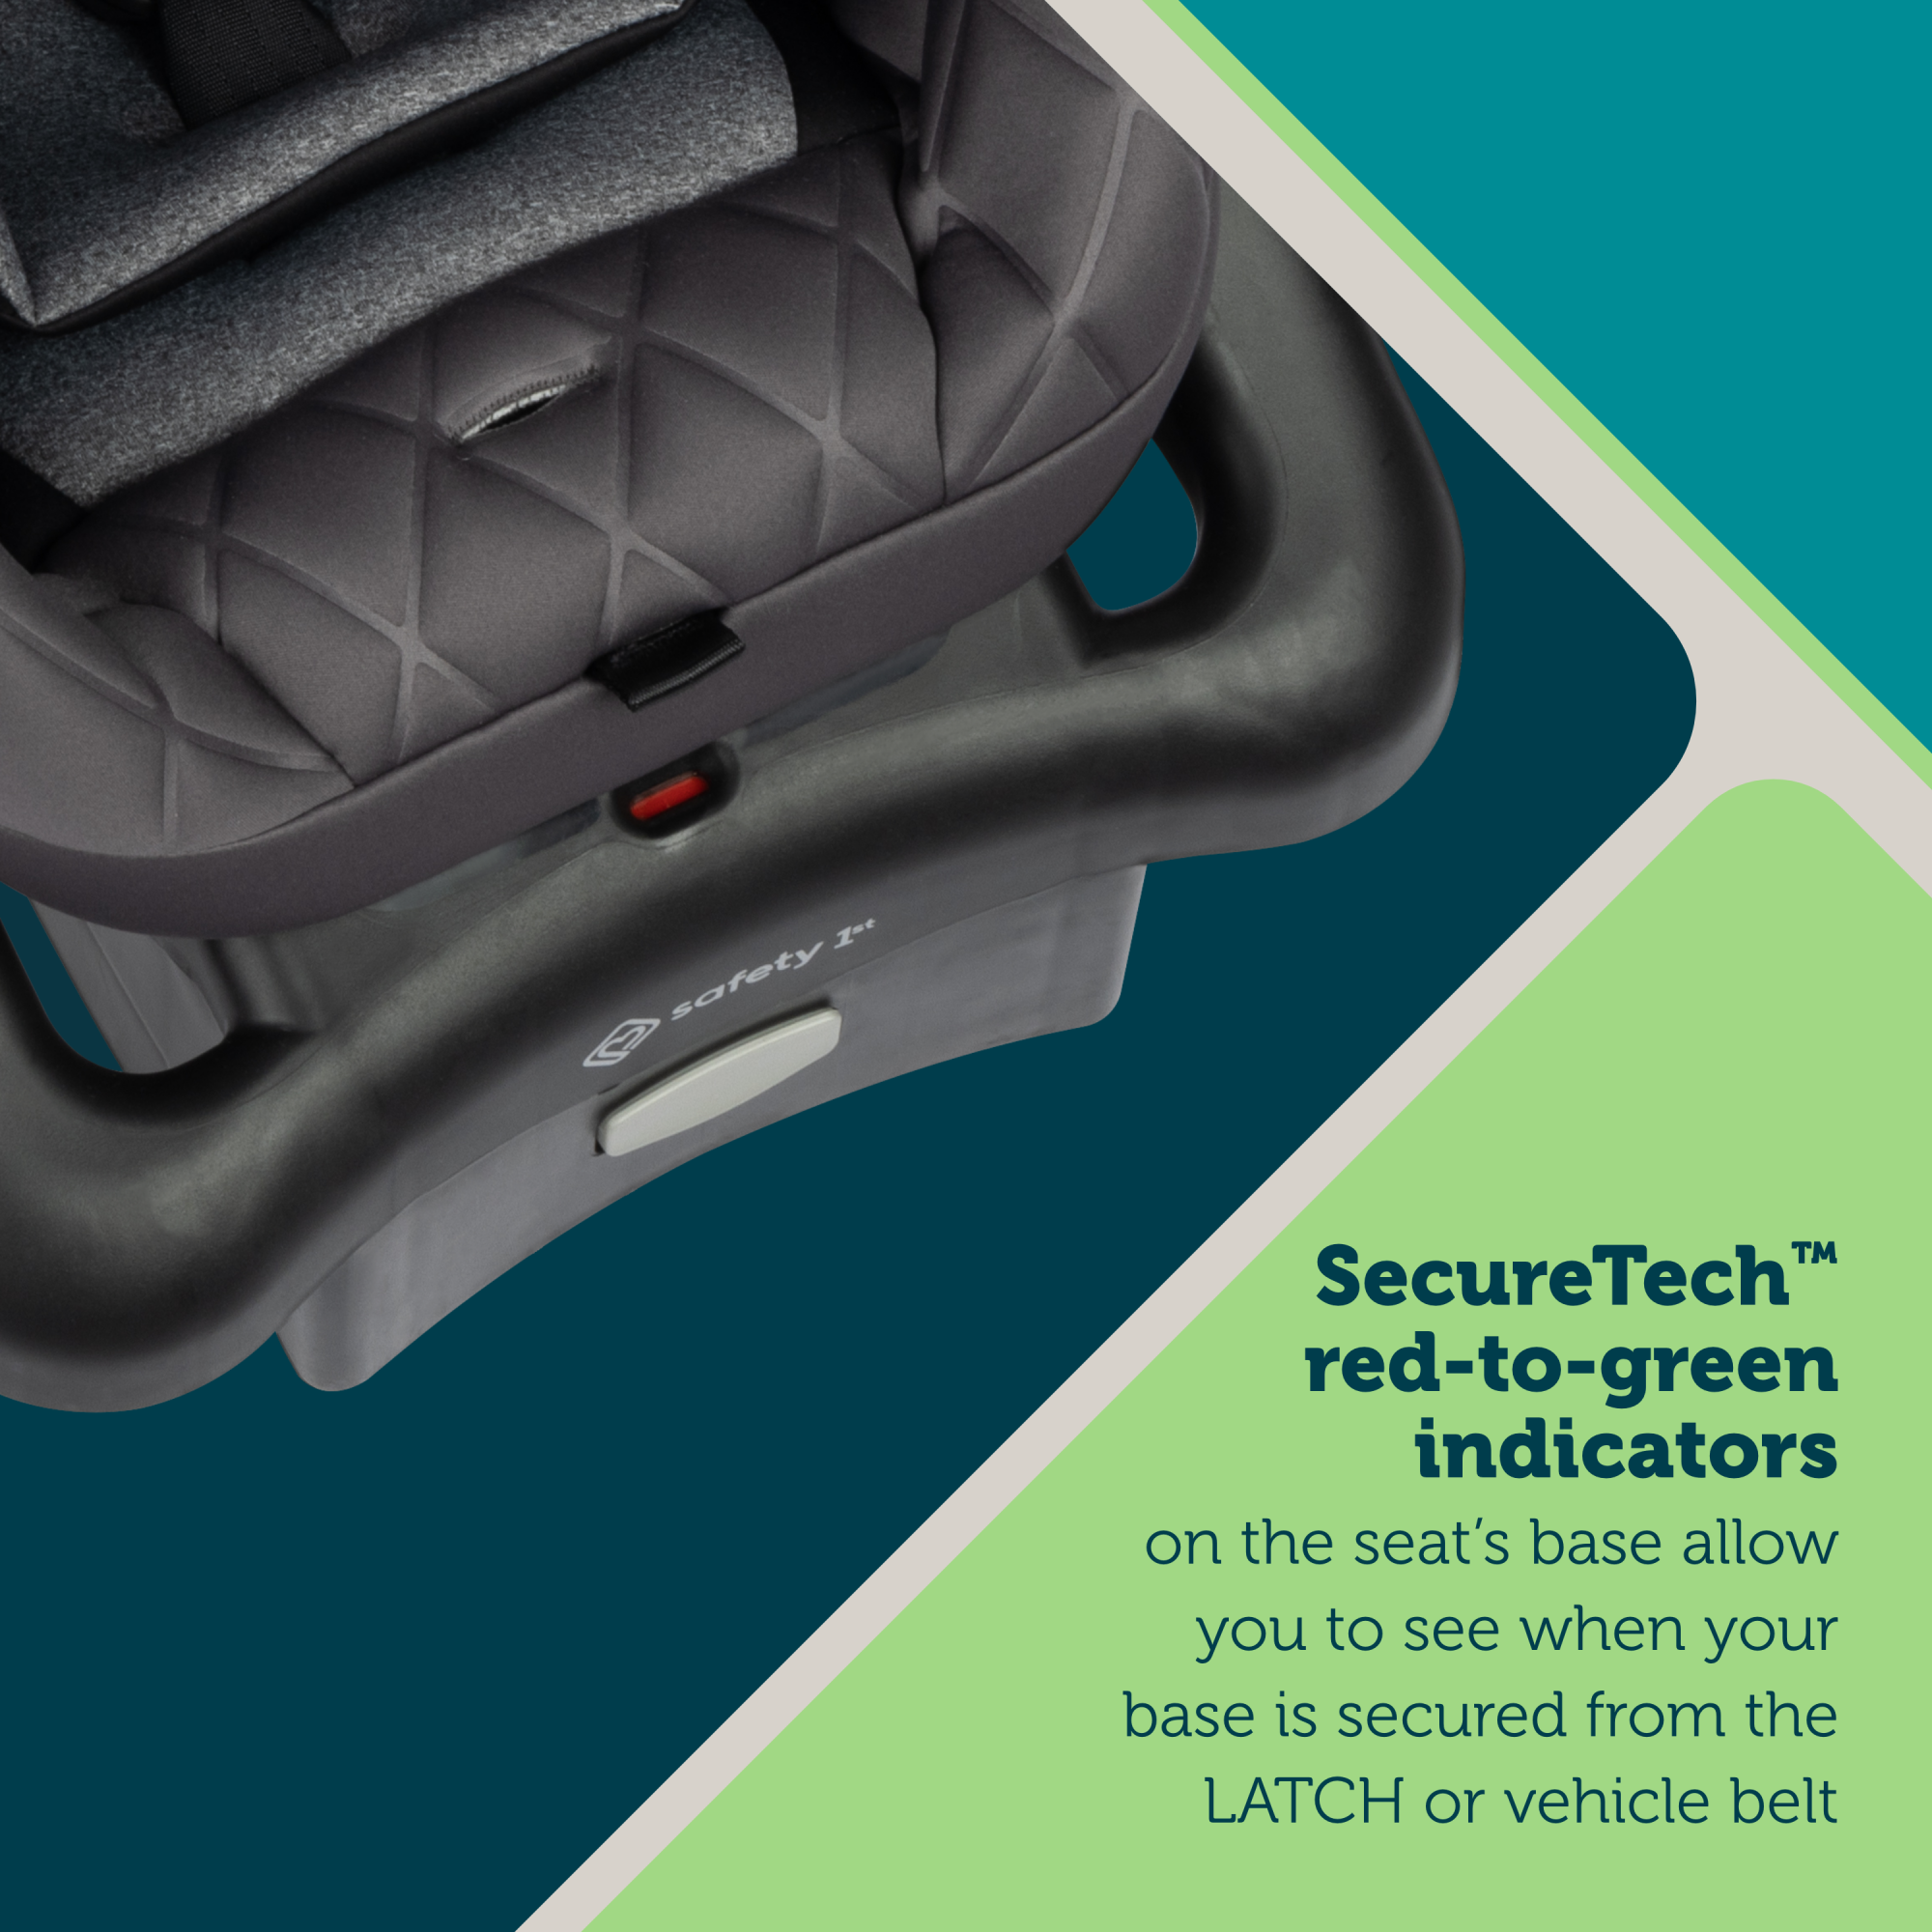 onBoard™ Insta-LATCH™ DLX Infant Car Seat - Ultra-lightweight design weighs only 7.5 lbs.